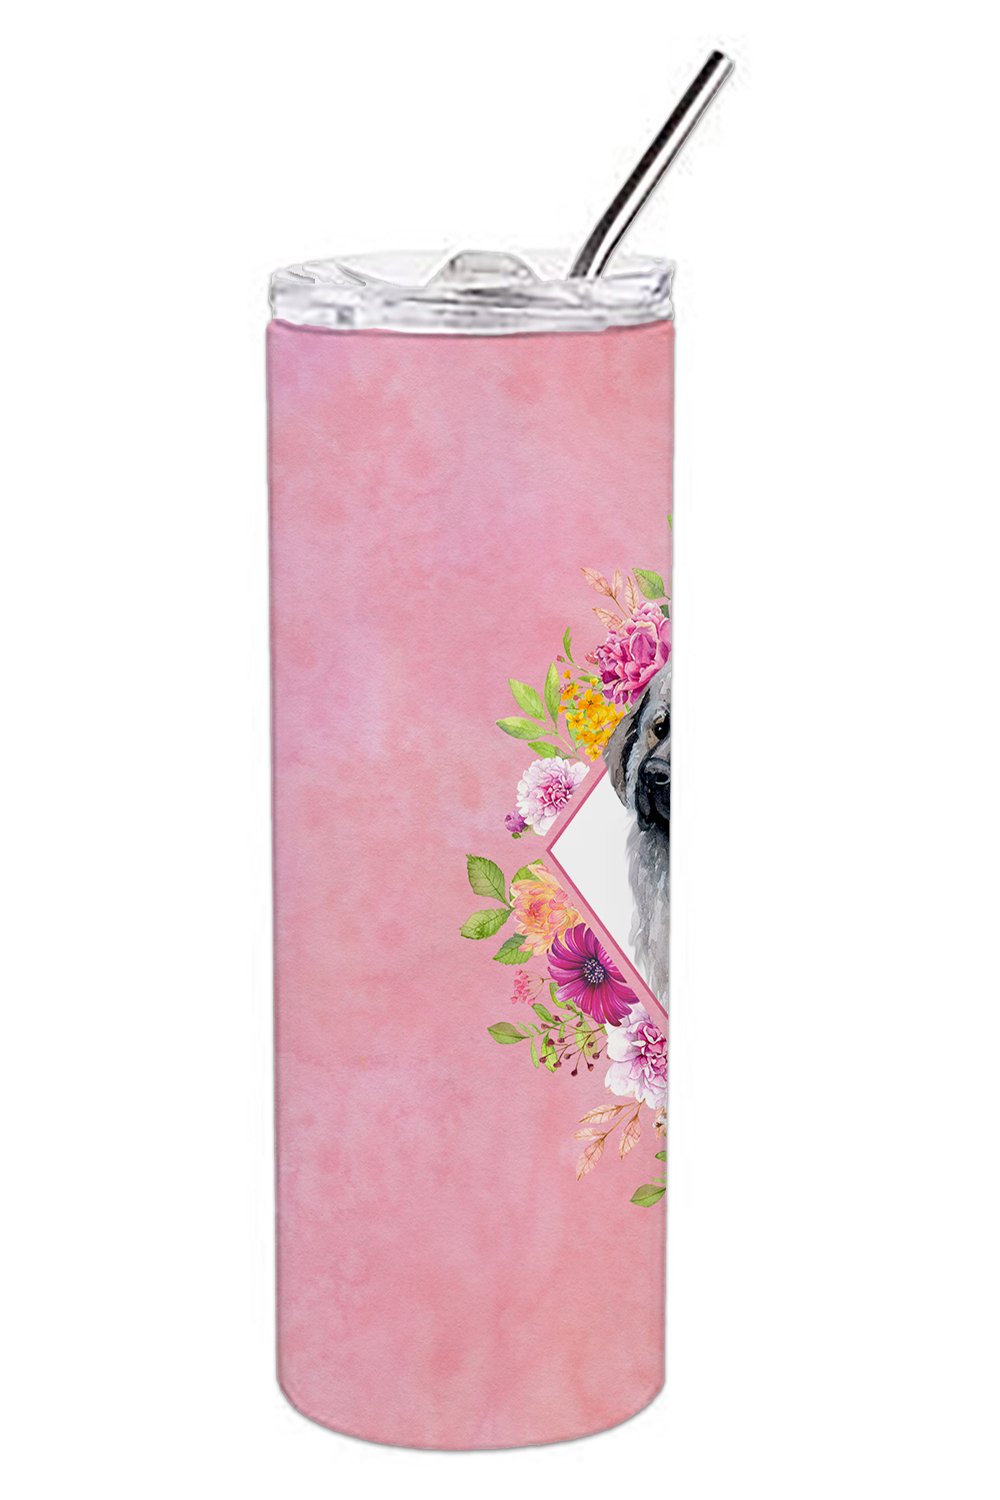 Moscow Watchdog Pink Flowers Double Walled Stainless Steel 20 oz Skinny Tumbler CK4162TBL20 by Caroline's Treasures